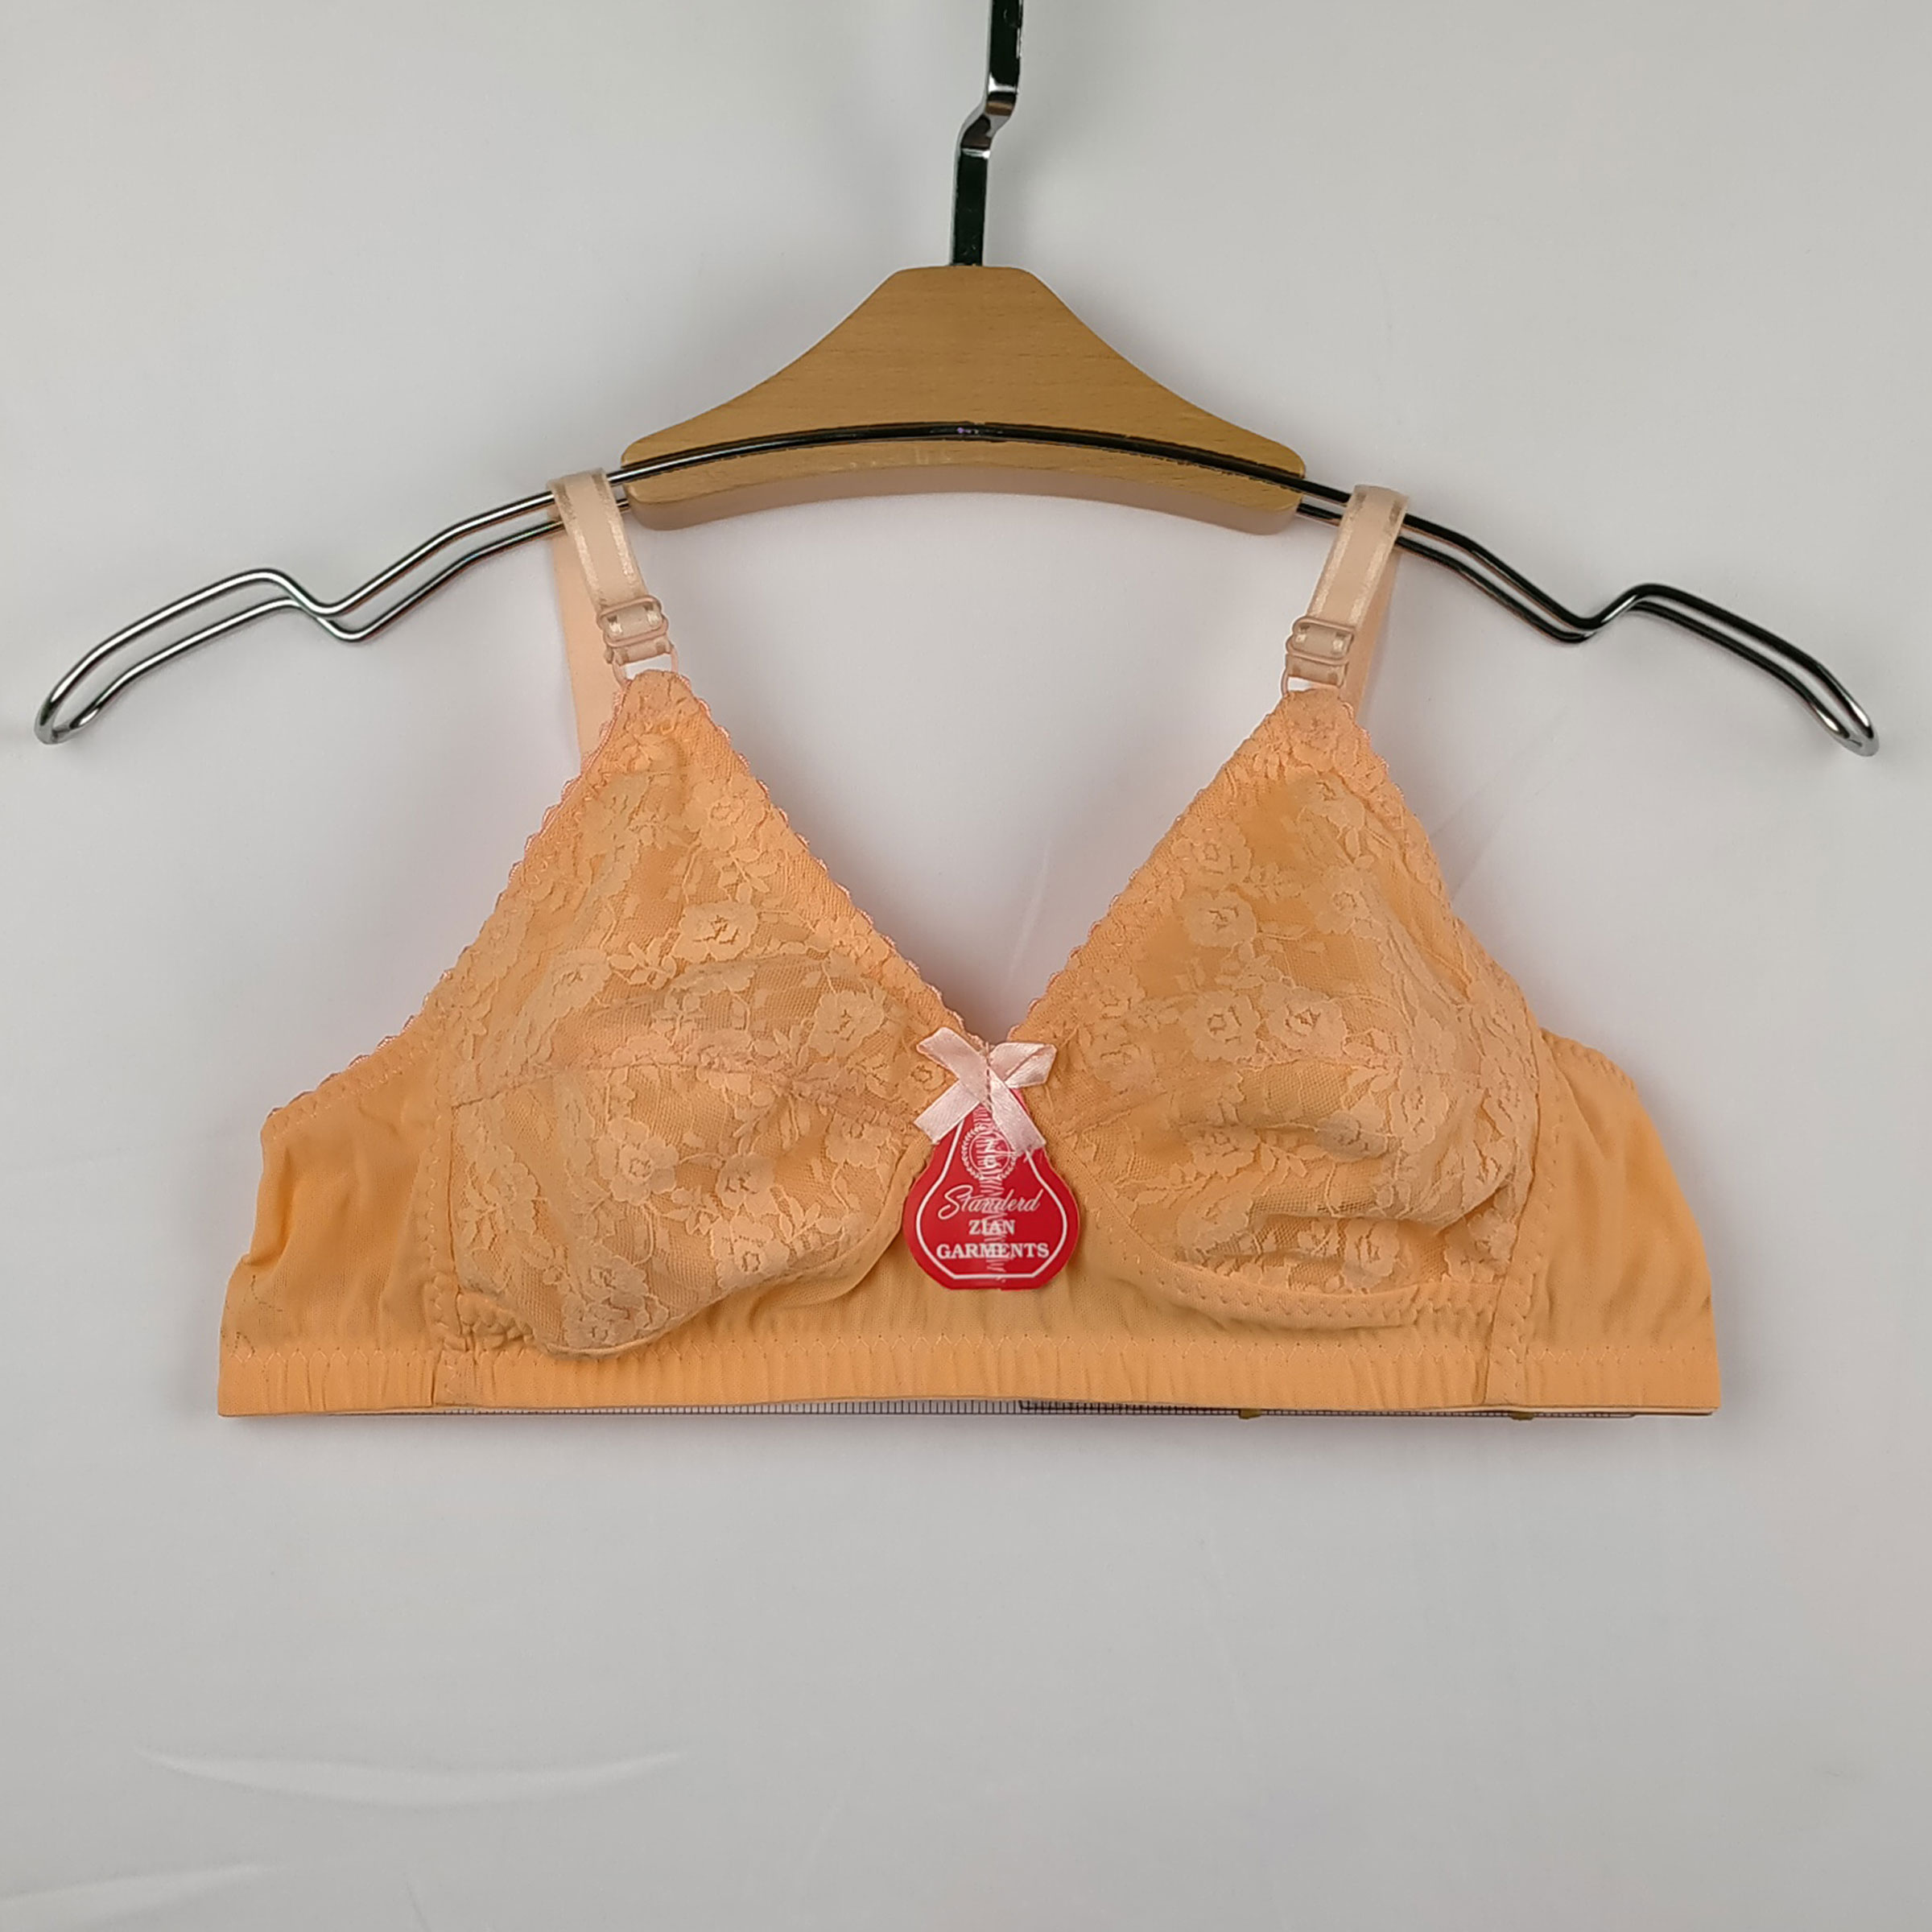 IFG - Our Oriental Look bra is made entirely with lace for a snazzy look  and comfortable feel. #IFG #OrientalLook